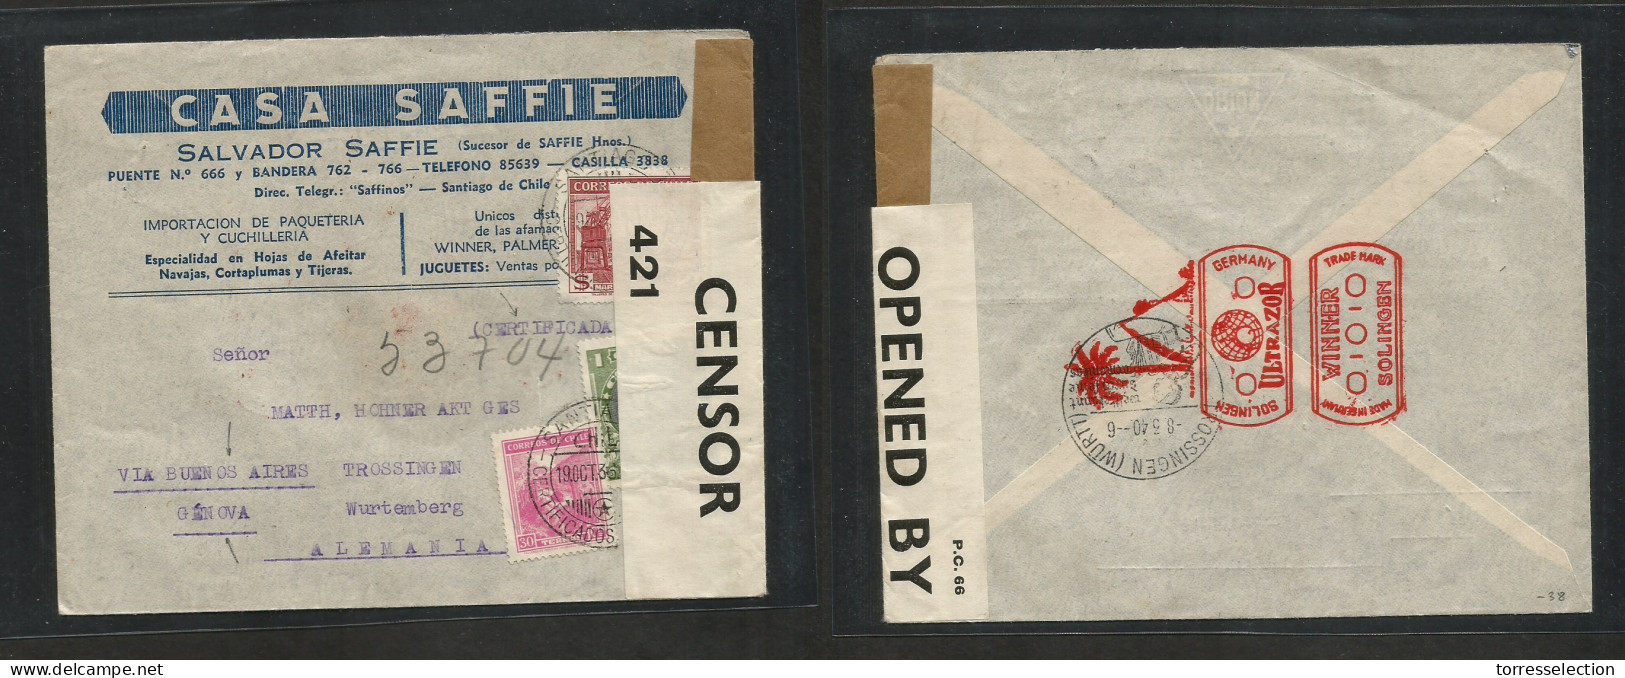 Chile - XX. 1939 (19 Oct) Stgo - Germany, Trossingen (9 March 40) Via Buenos Aires - Genova. WWII Censored Illustrated M - Cile